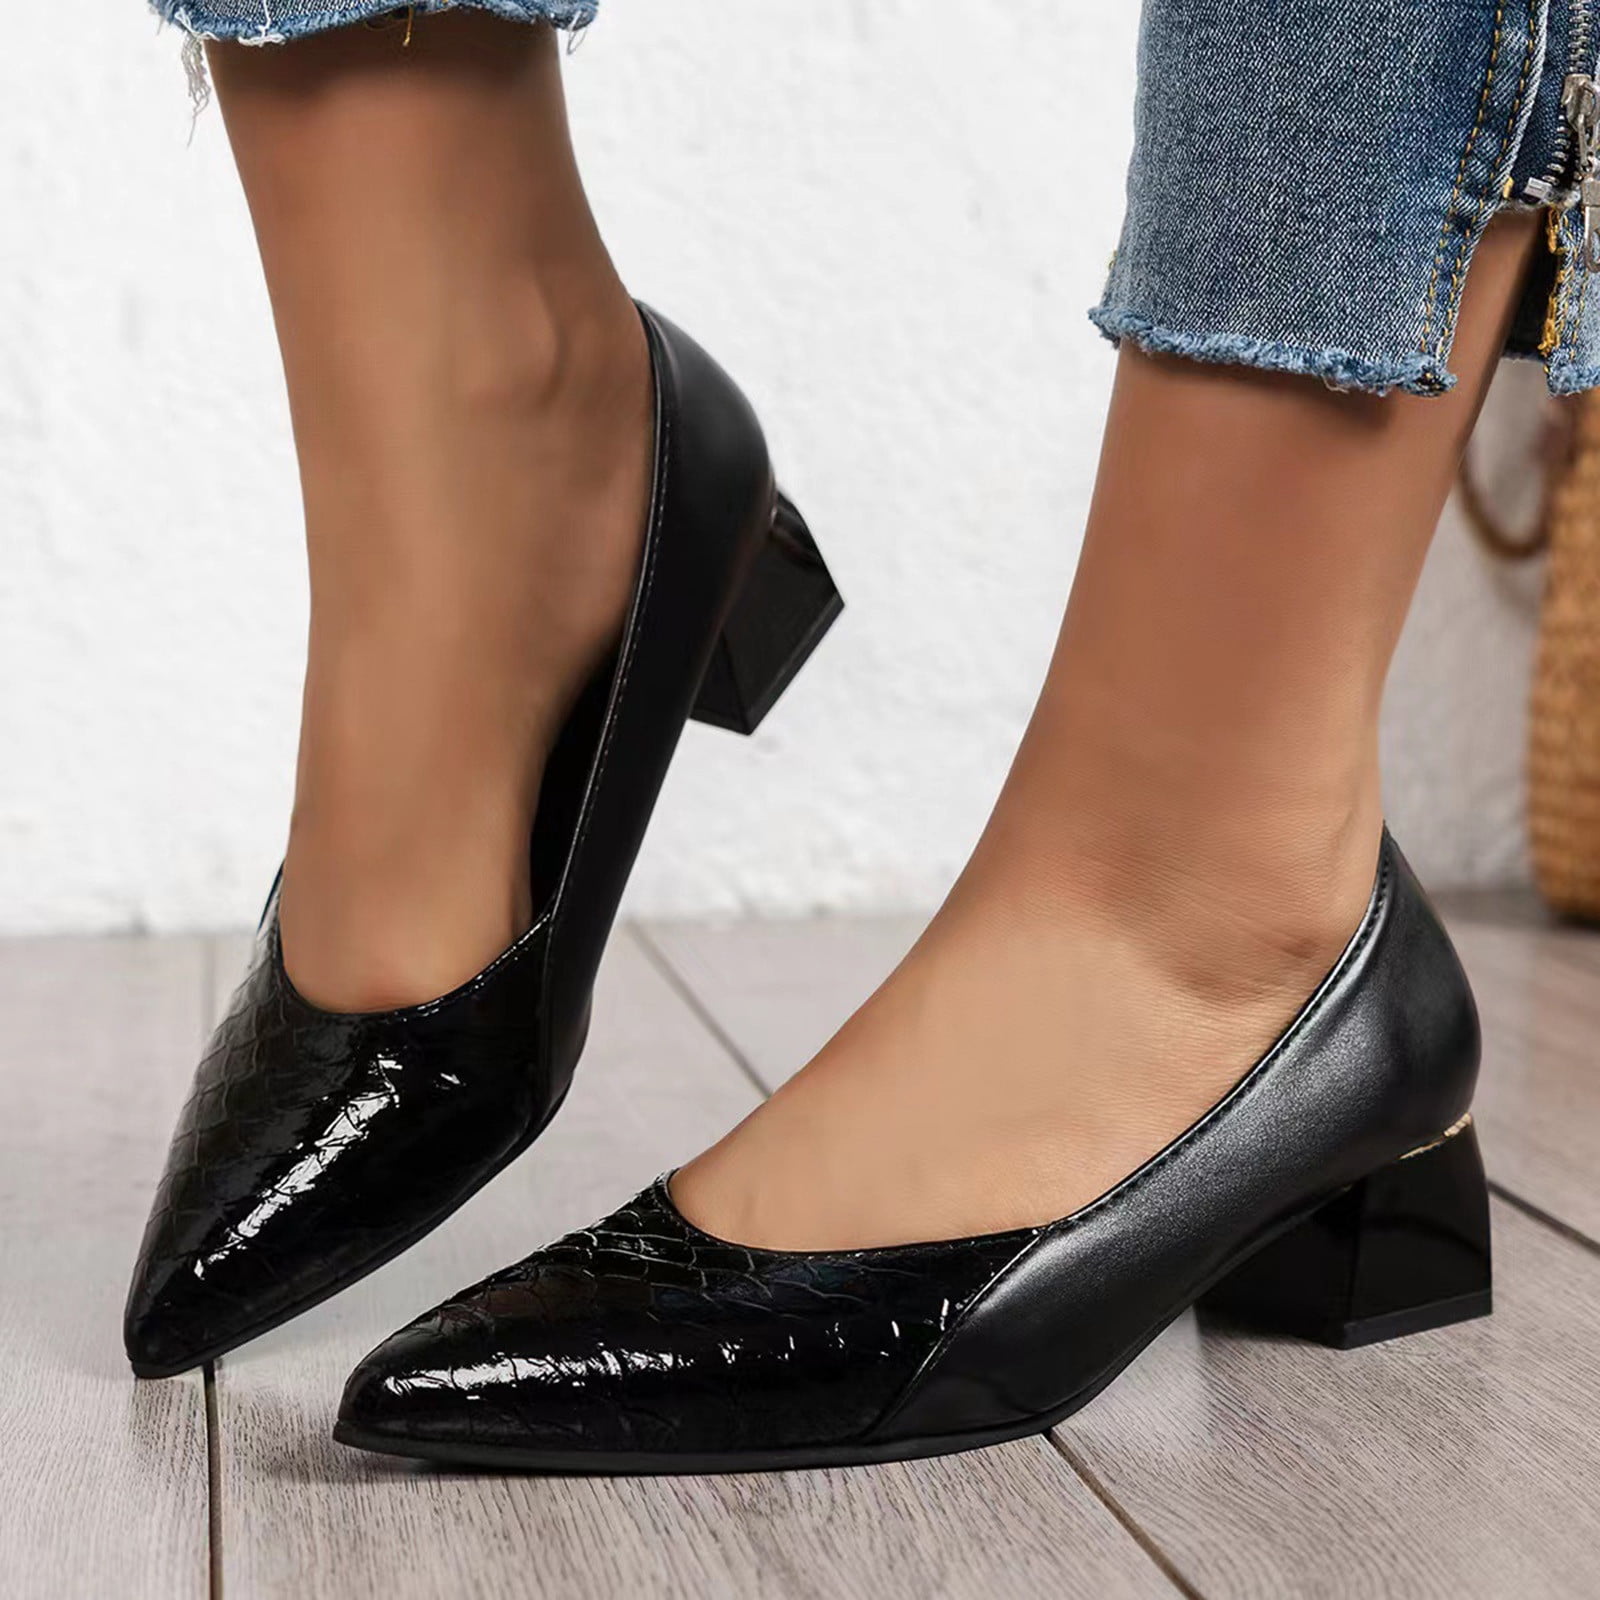 Cathalem Heels Short Ladies Fashion Colorblock Leather Pointed Toe Pumps  Thick High Heel Casual Shoes within Shoes for Women Black 7.5 - Walmart.com